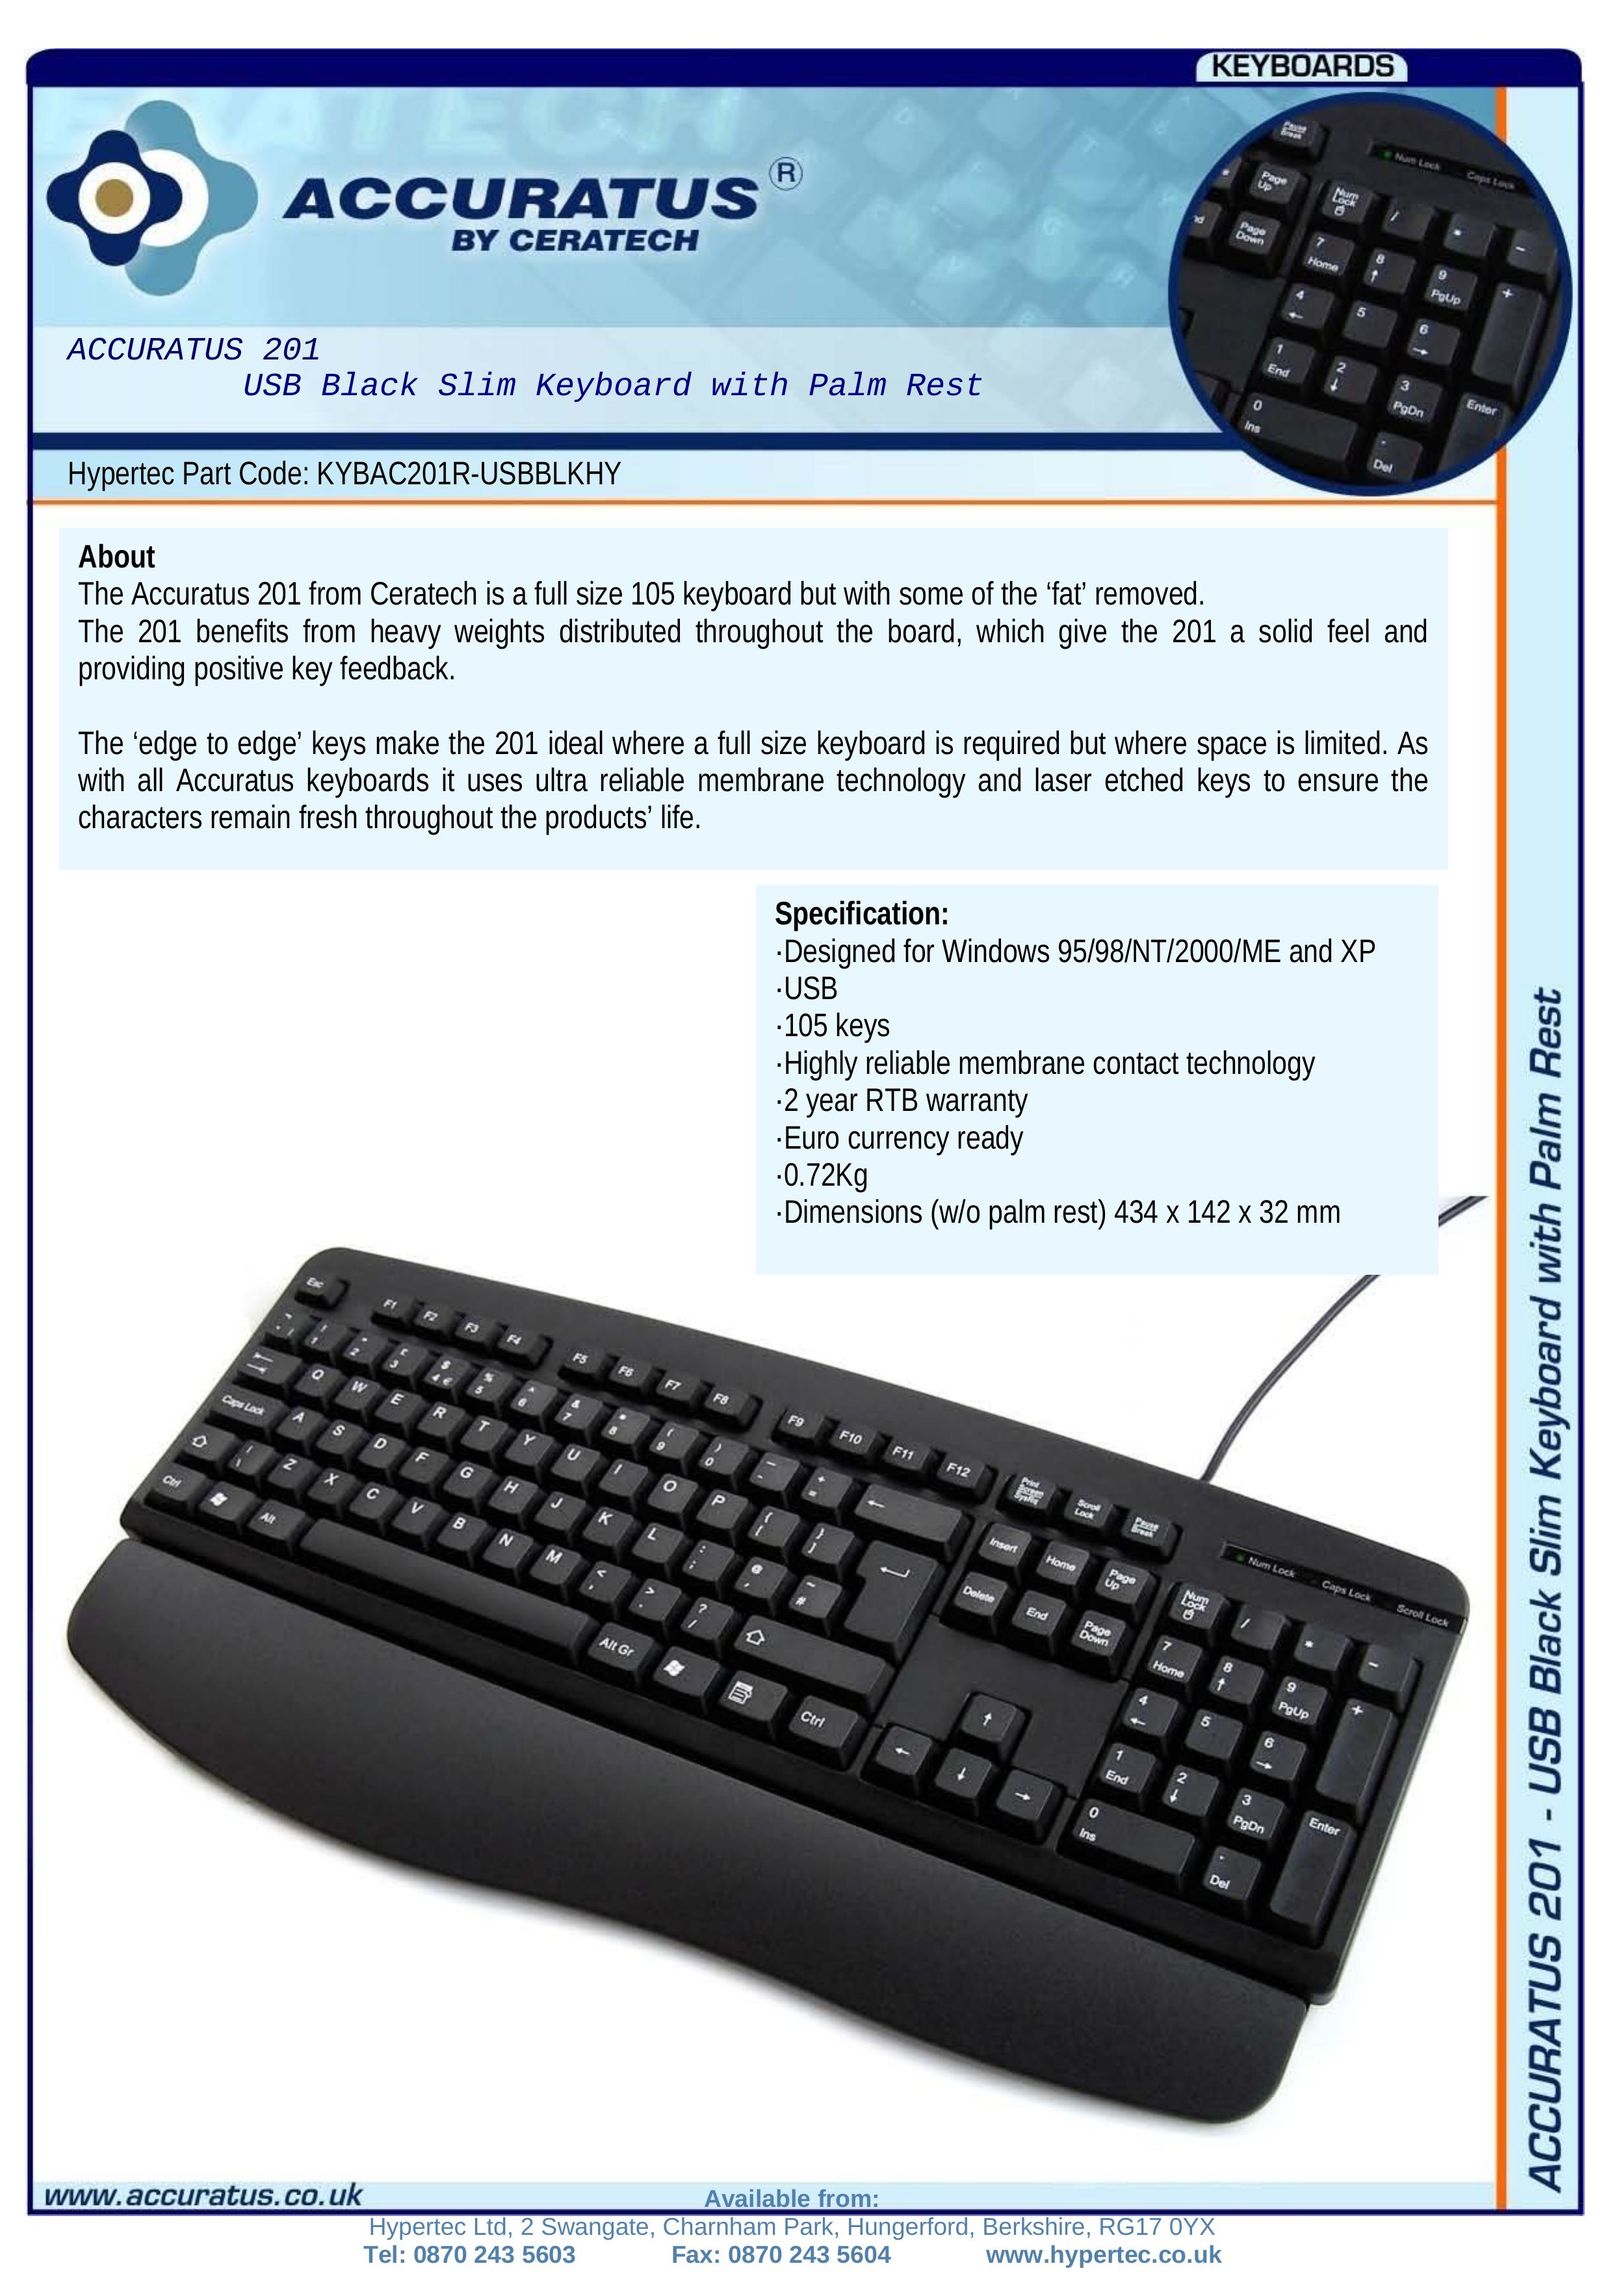 Hypertec KYBAC201R-USBBLKHY Mouse User Manual